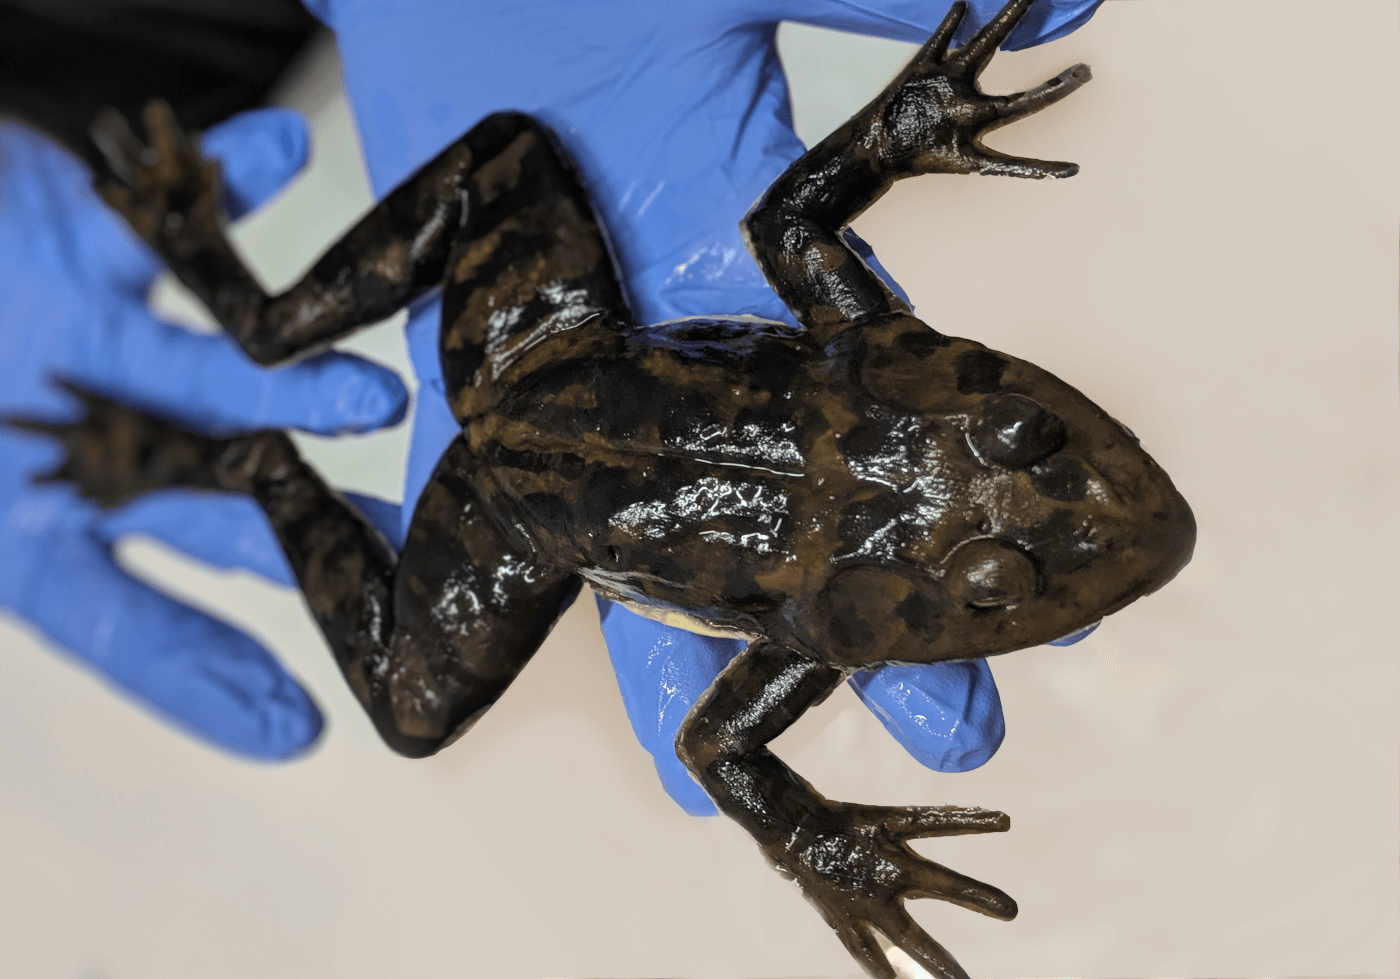 The SynFrog being held by someone with blue sterile gloves on